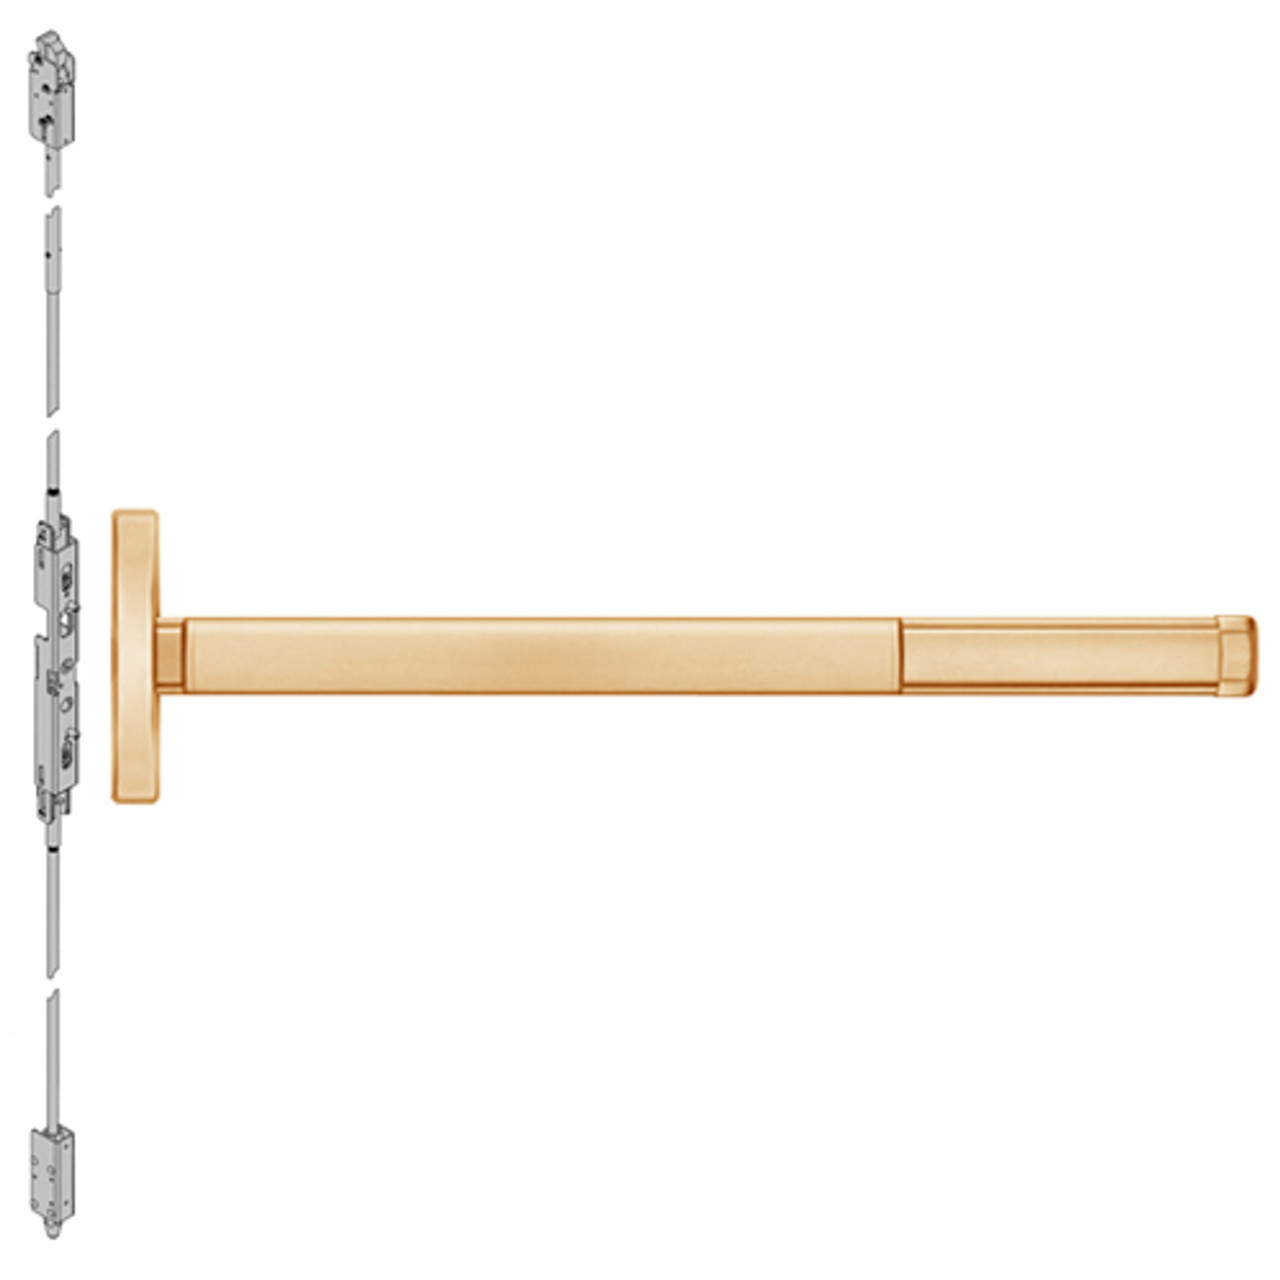 TS2603LBR-612-36 PHI 2600 Series Concealed Vertical Rod Exit Device with Touchbar Monitoring Switch Prepped for Key Retracts Latchbolt in Satin Bronze Finish